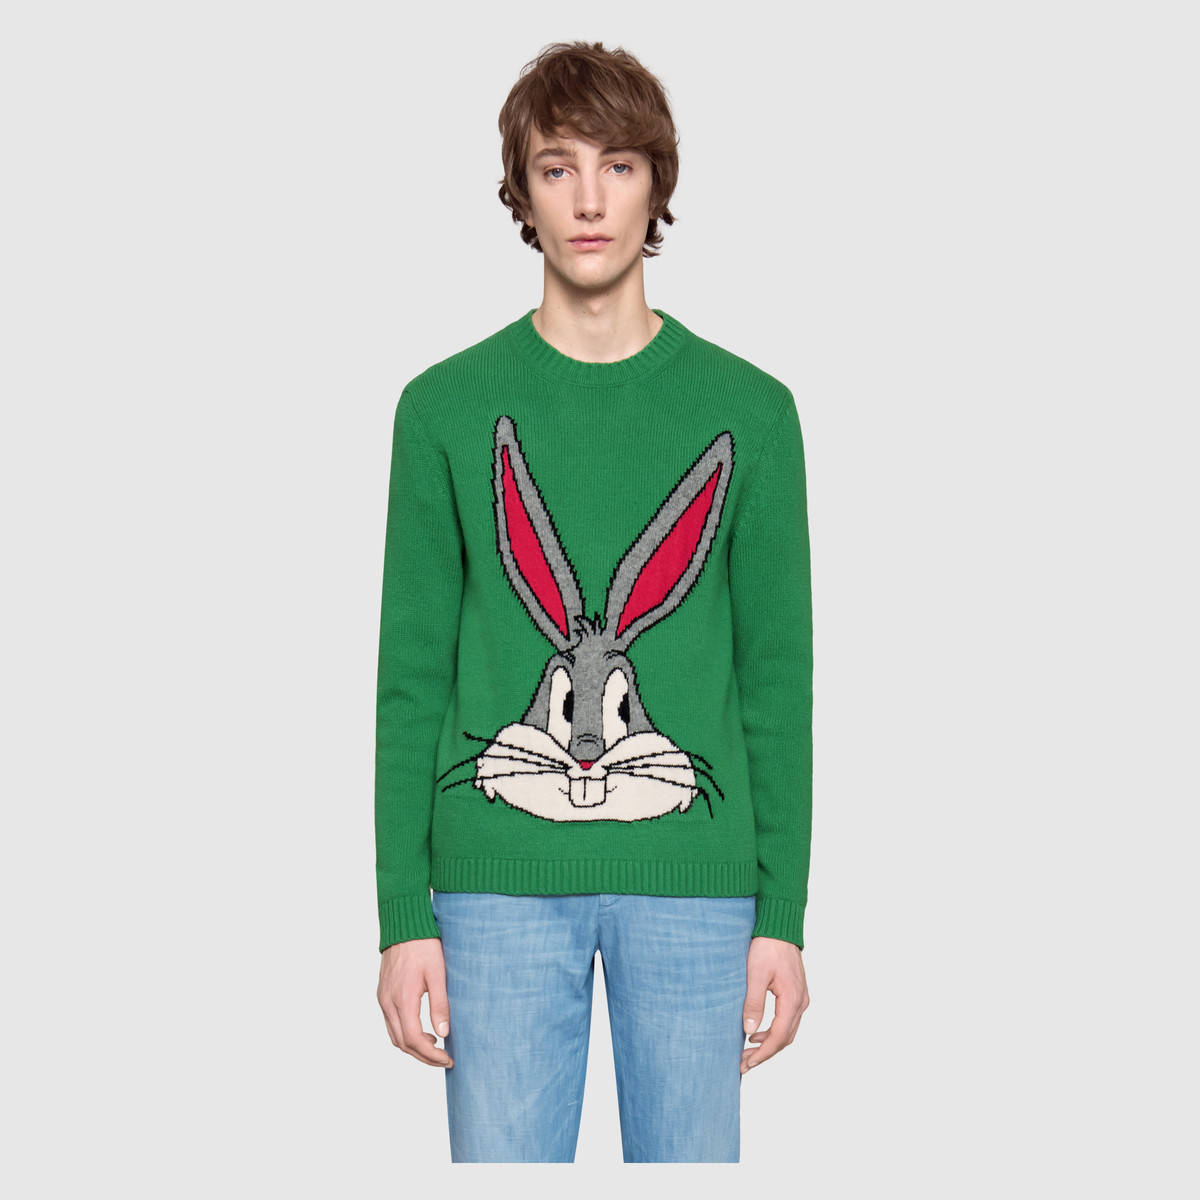 Overleving Kruipen galop Shop the new Gucci Bugs Bunny Wool Knit Sweater